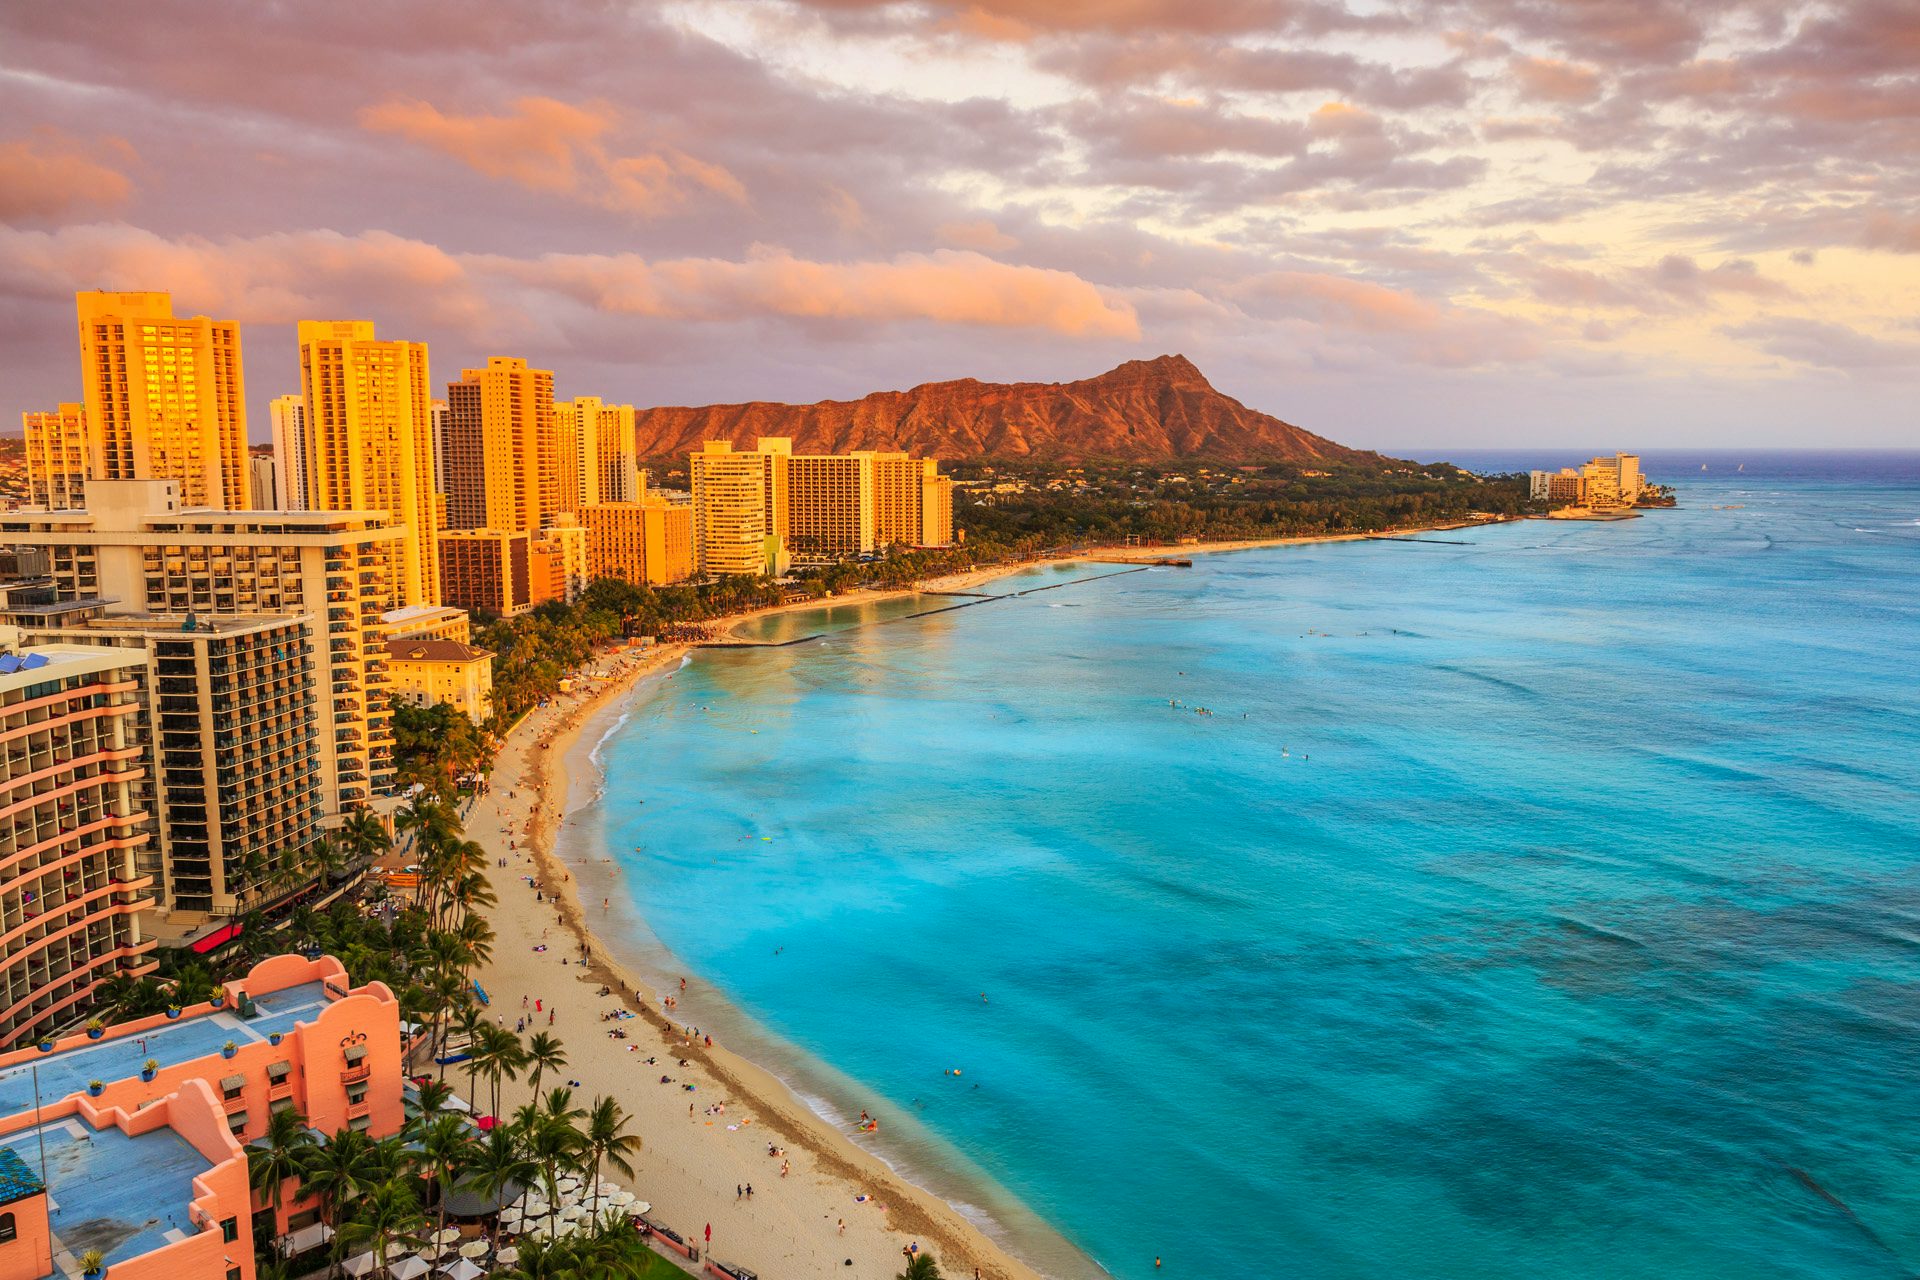 cruises from united states to hawaii